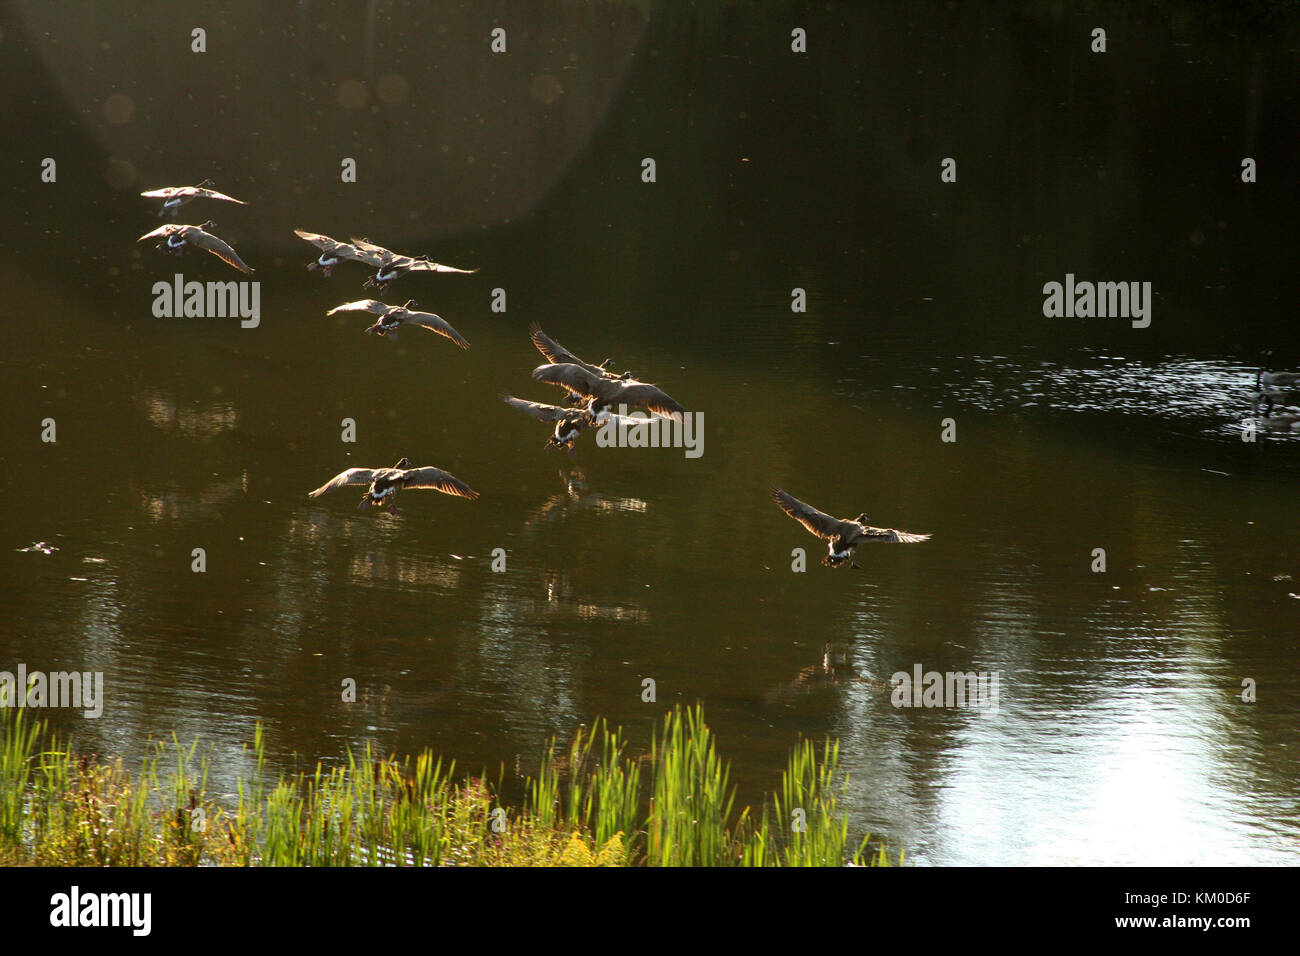 Flying geese landing on water Stock Photo